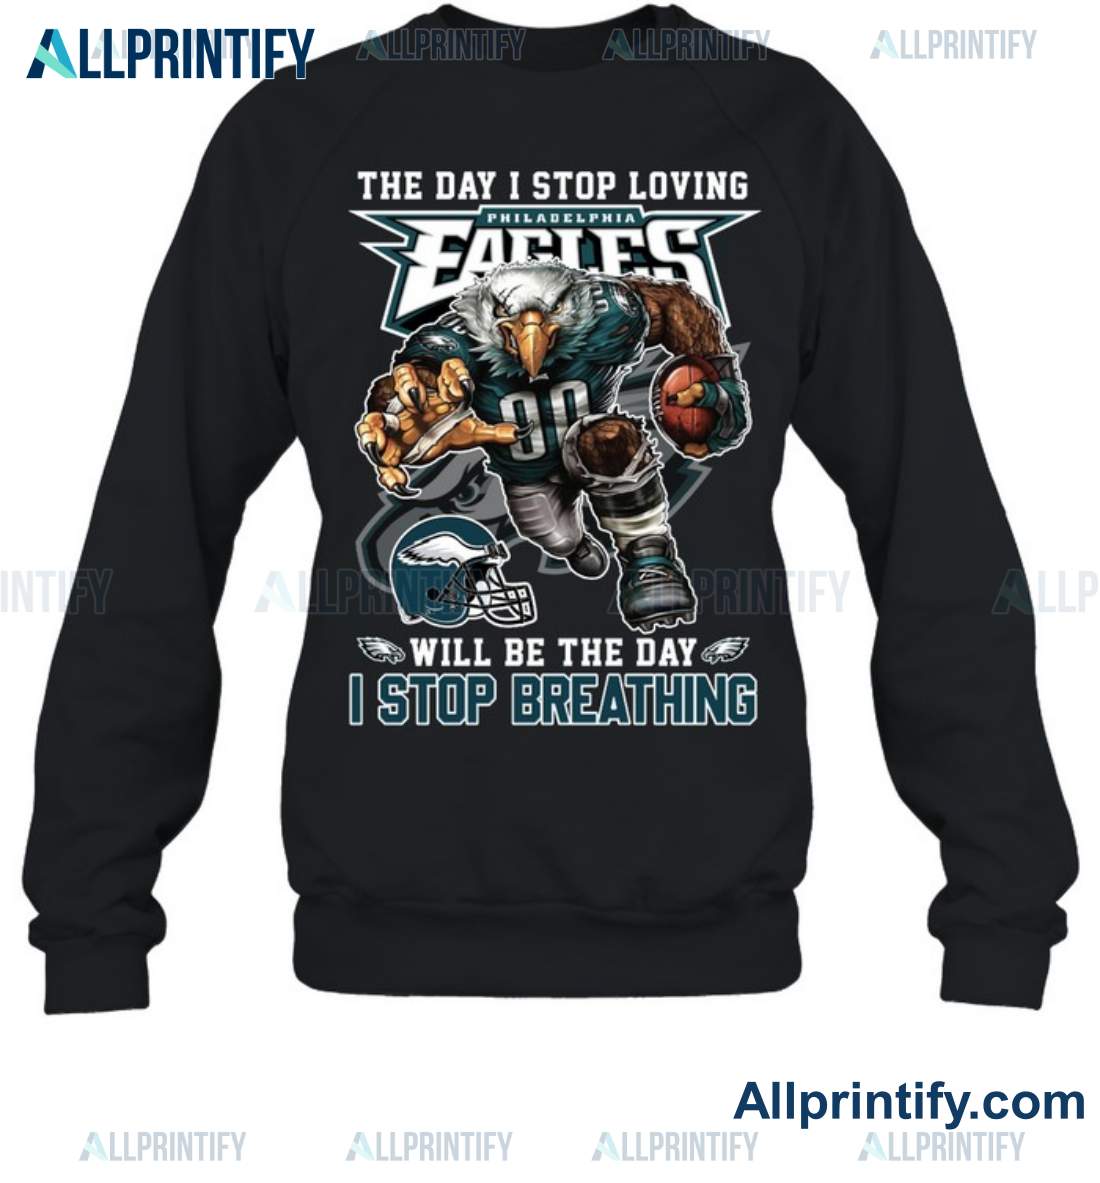 The Day I Stop Loving Philadelphia Eagles Will Be The Day I Stop Breathing Shirt c